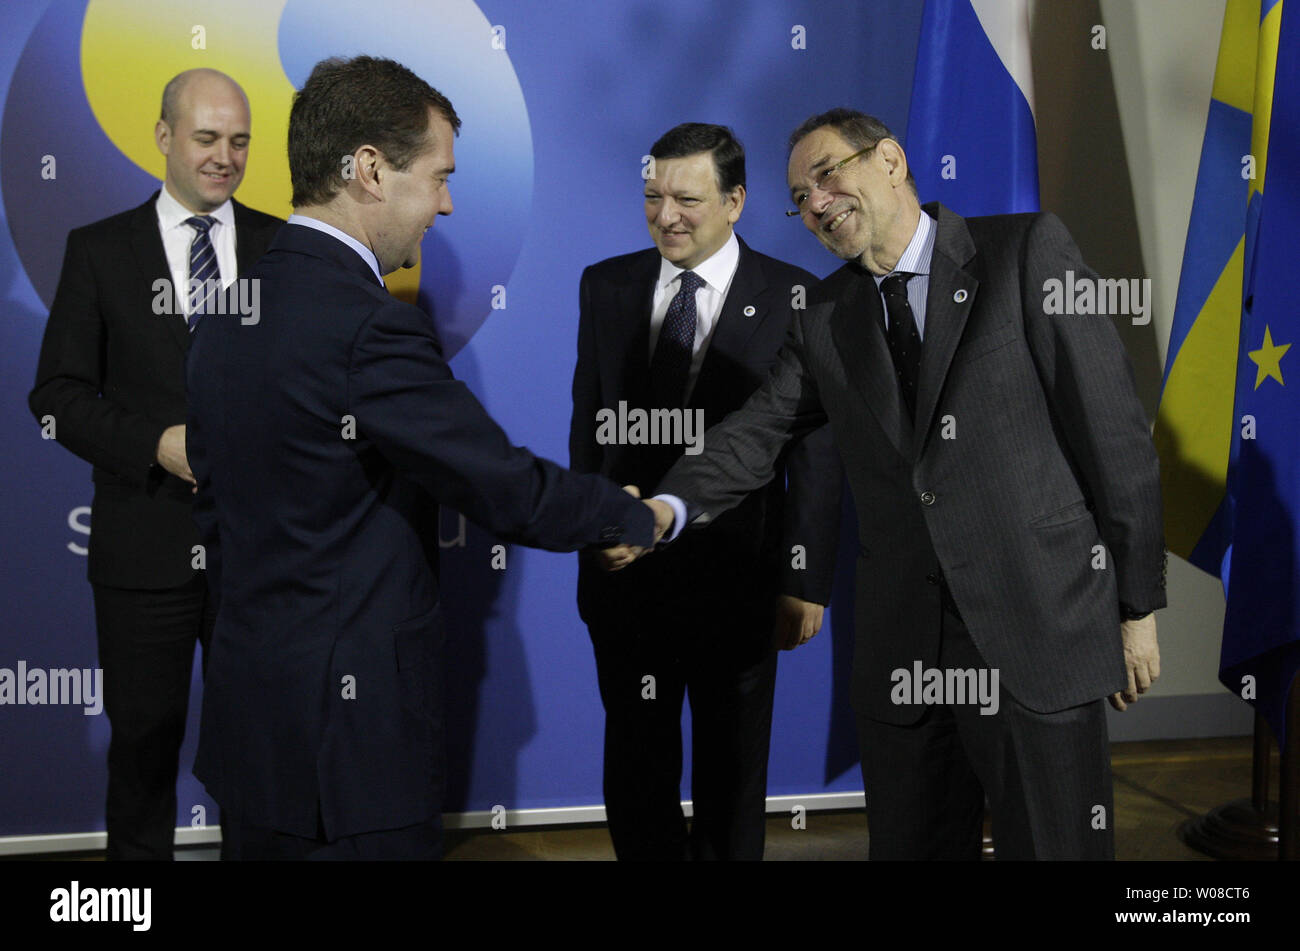 Russian President Dmitry Medvedev (2nd L) shakes hands with EU Foreign Policy Javier Solana (R) as Swedish Prime Minister Fredrick Reinfeldt (L) and European Commission President Jose Manuel Barroso smile at the begging of  a one-day EU-Russia summit in Stockholm on November 18, 2009. UPI/Anatoli Zhdanov Stock Photo